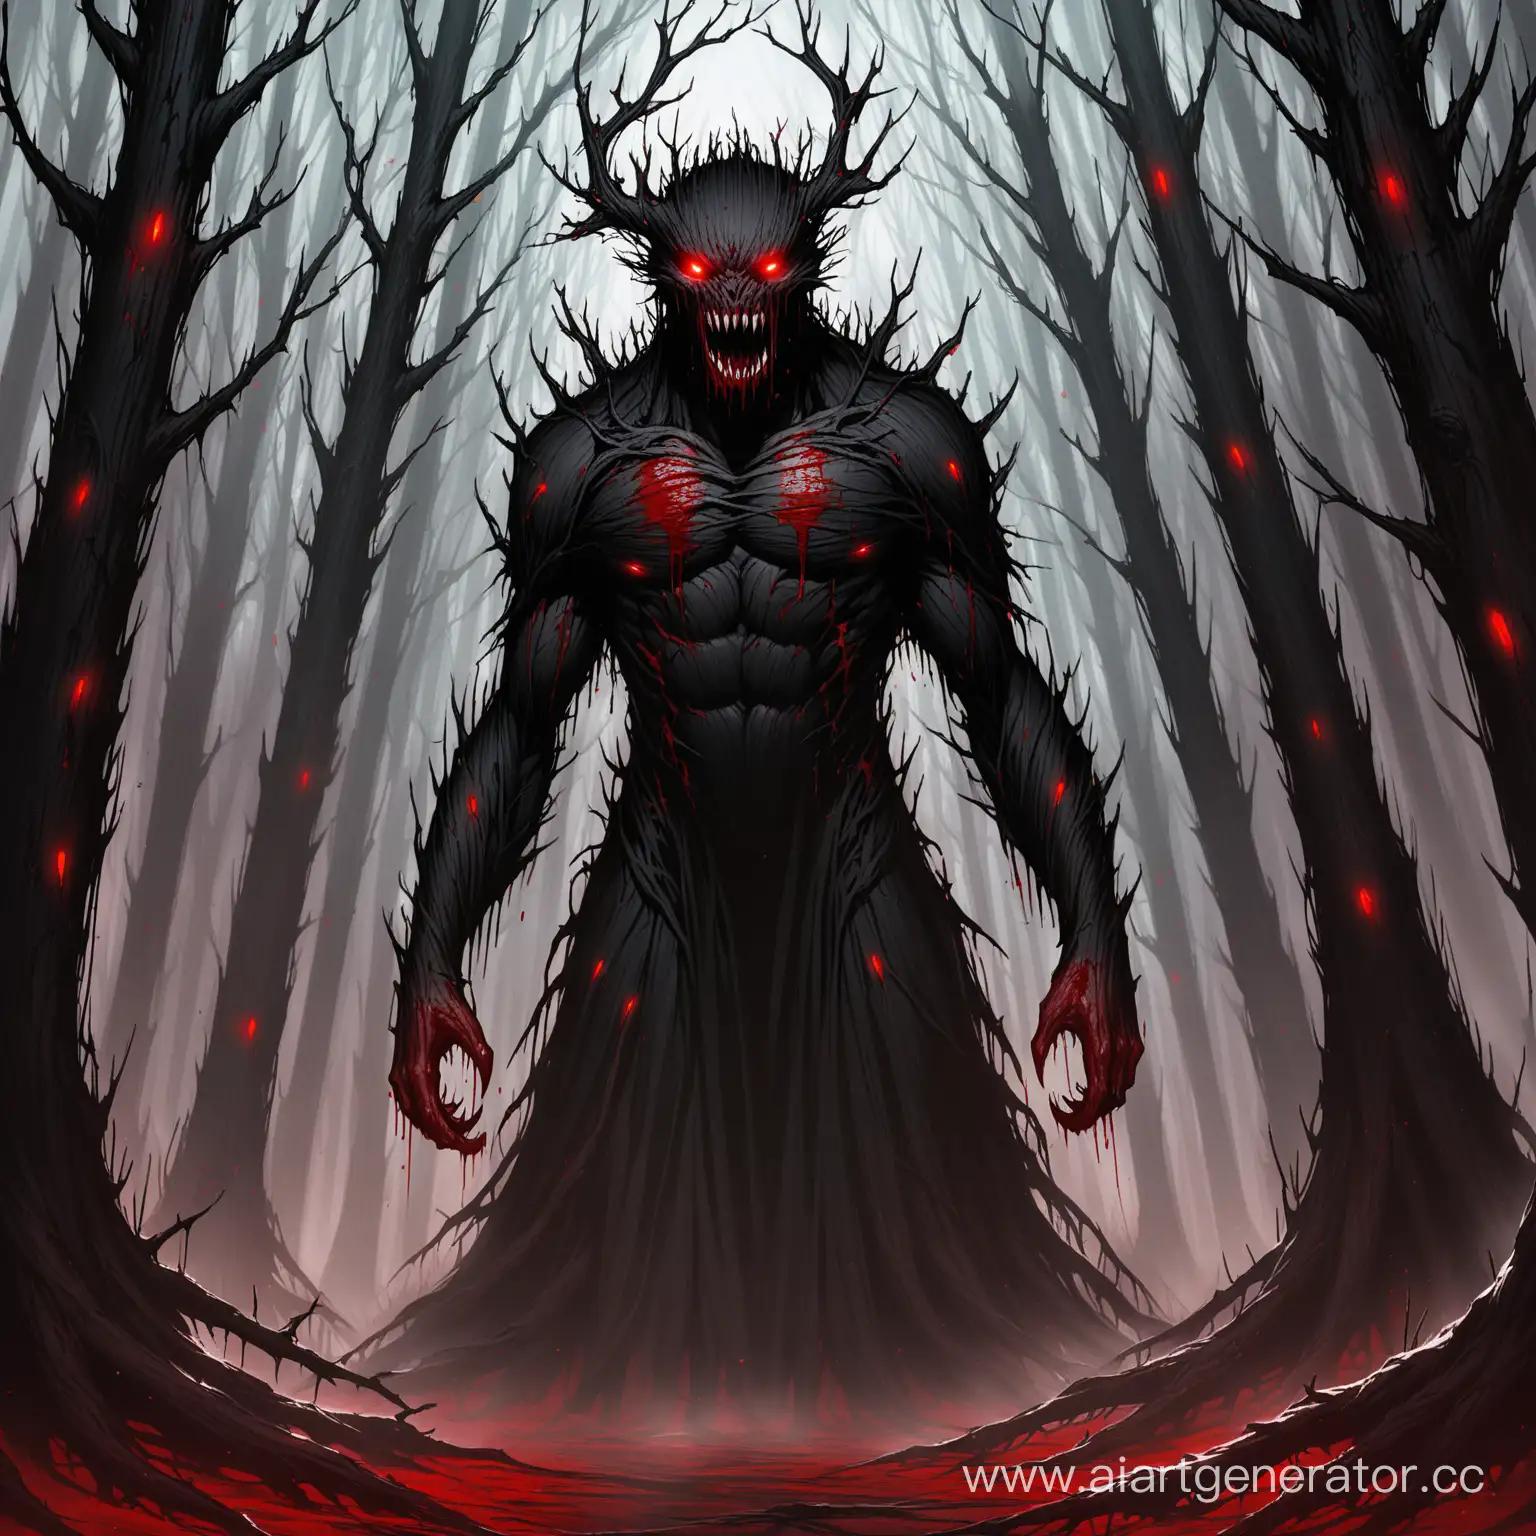 Eerie-Black-Treelings-with-Crimson-Eyes-and-Bloodied-Maws